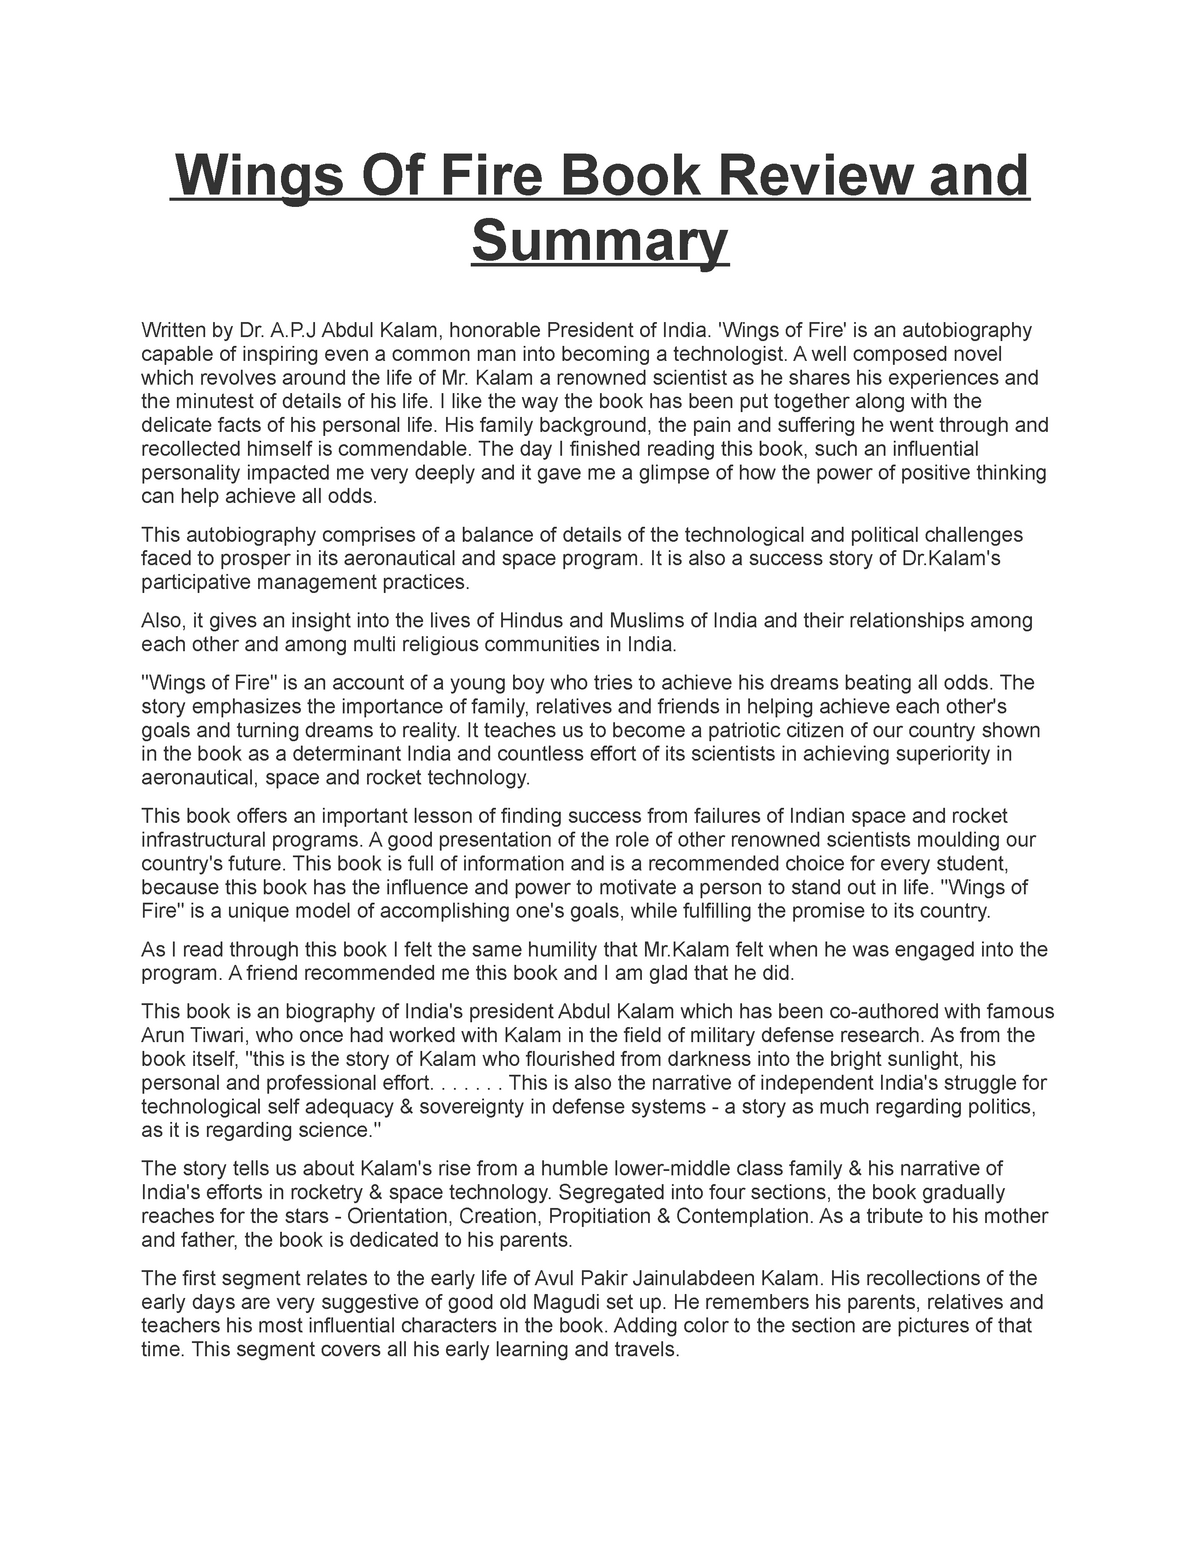 book review of wings of fire in 500 words